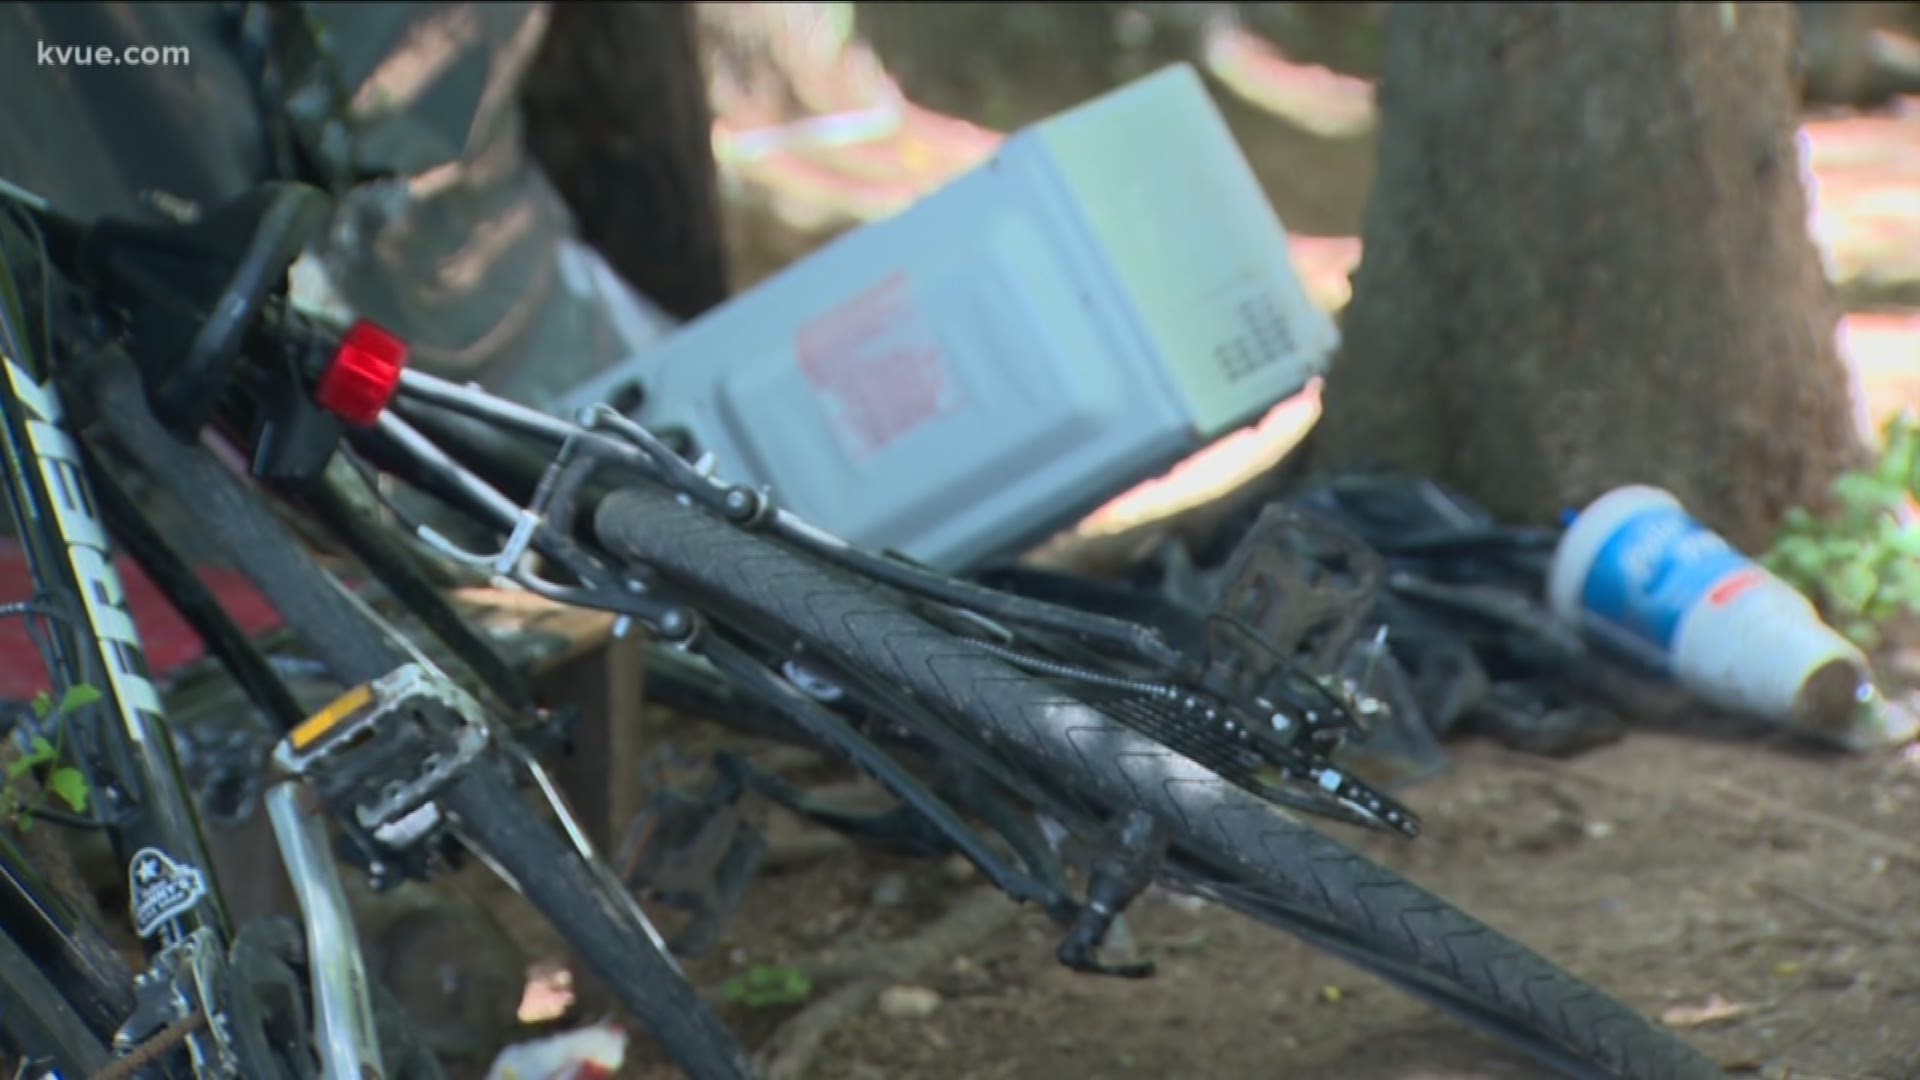 Police found more than a dozen stolen bikes in a homeless camp – one worth $6,000.